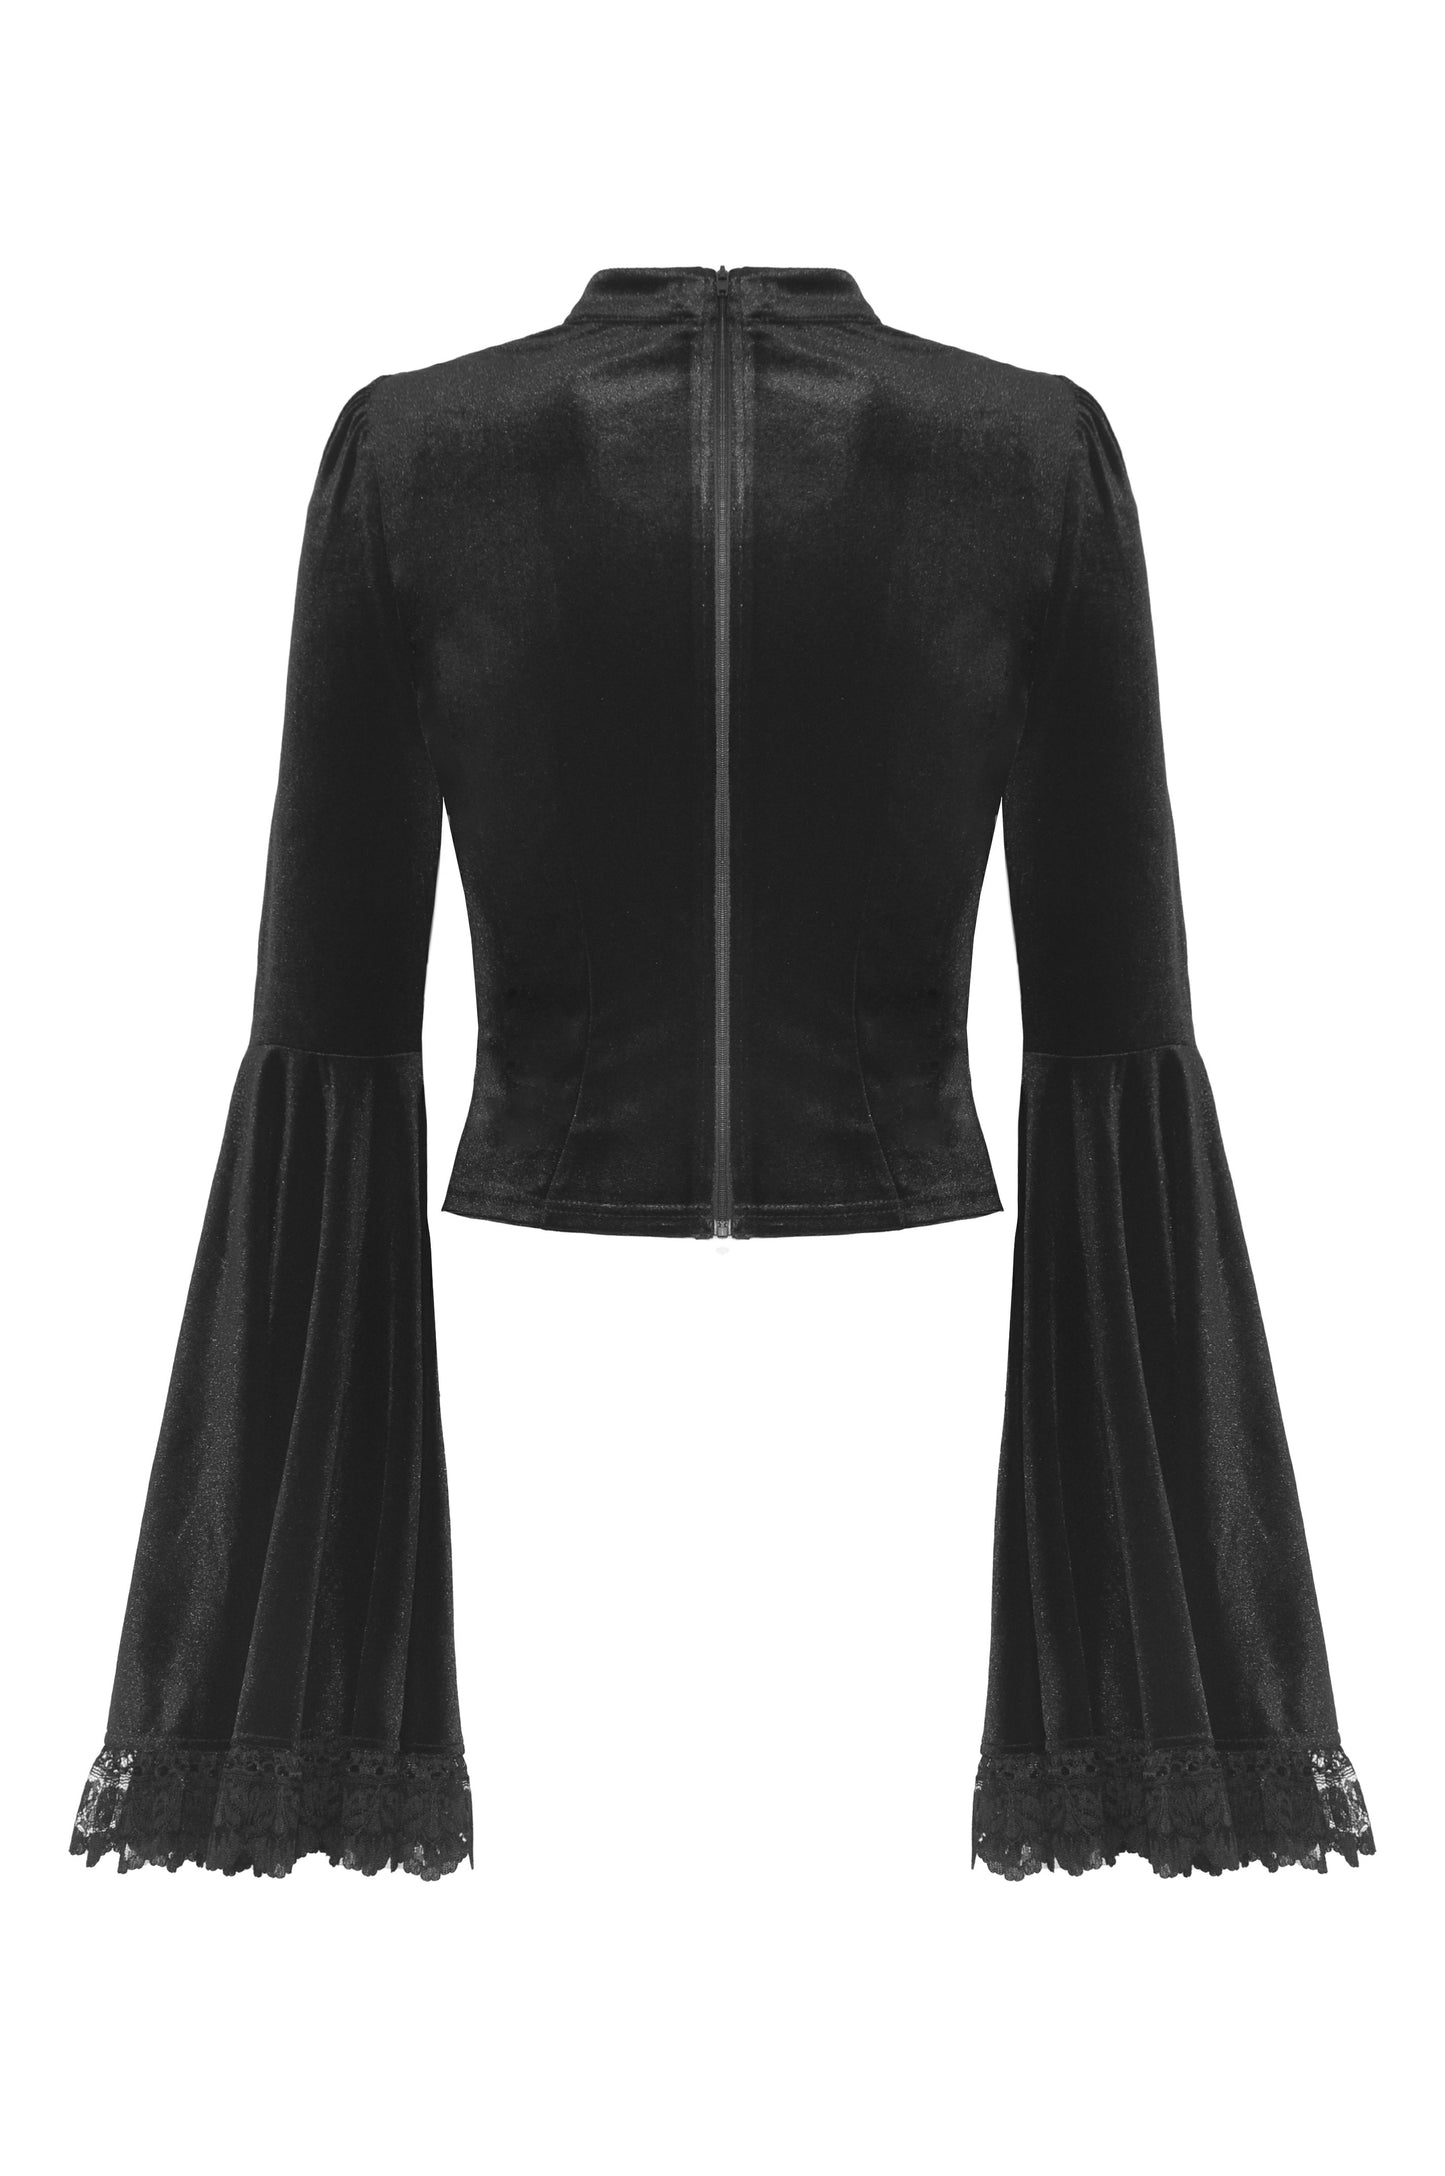 Ashes To Ashes Gothic Velvet Lace Top by Dark In Love